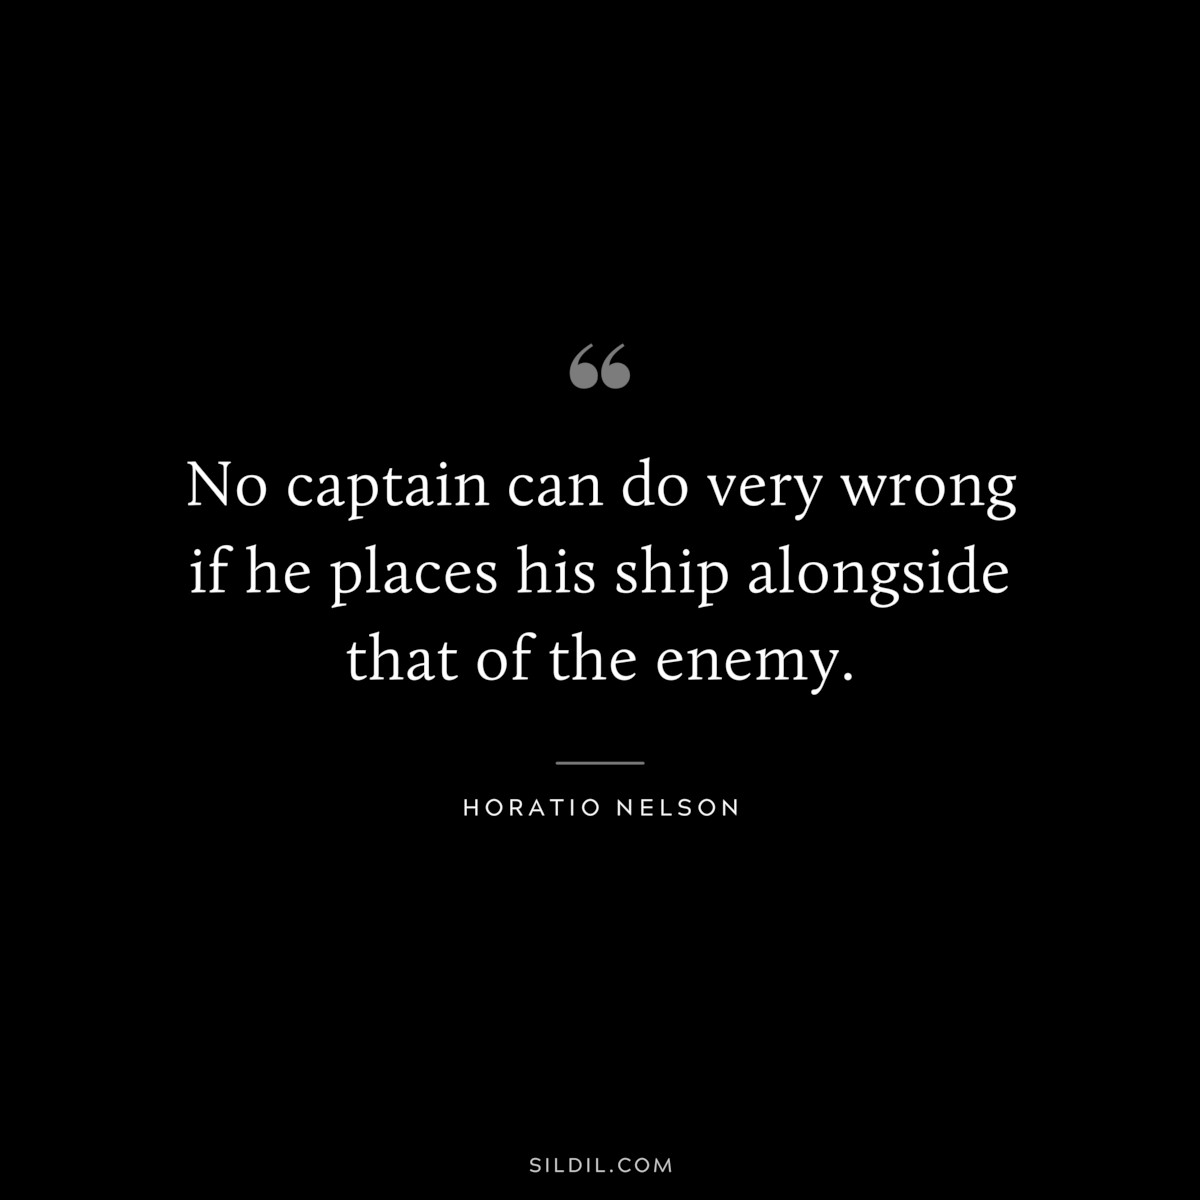 No captain can do very wrong if he places his ship alongside that of the enemy. ― Horatio Nelson